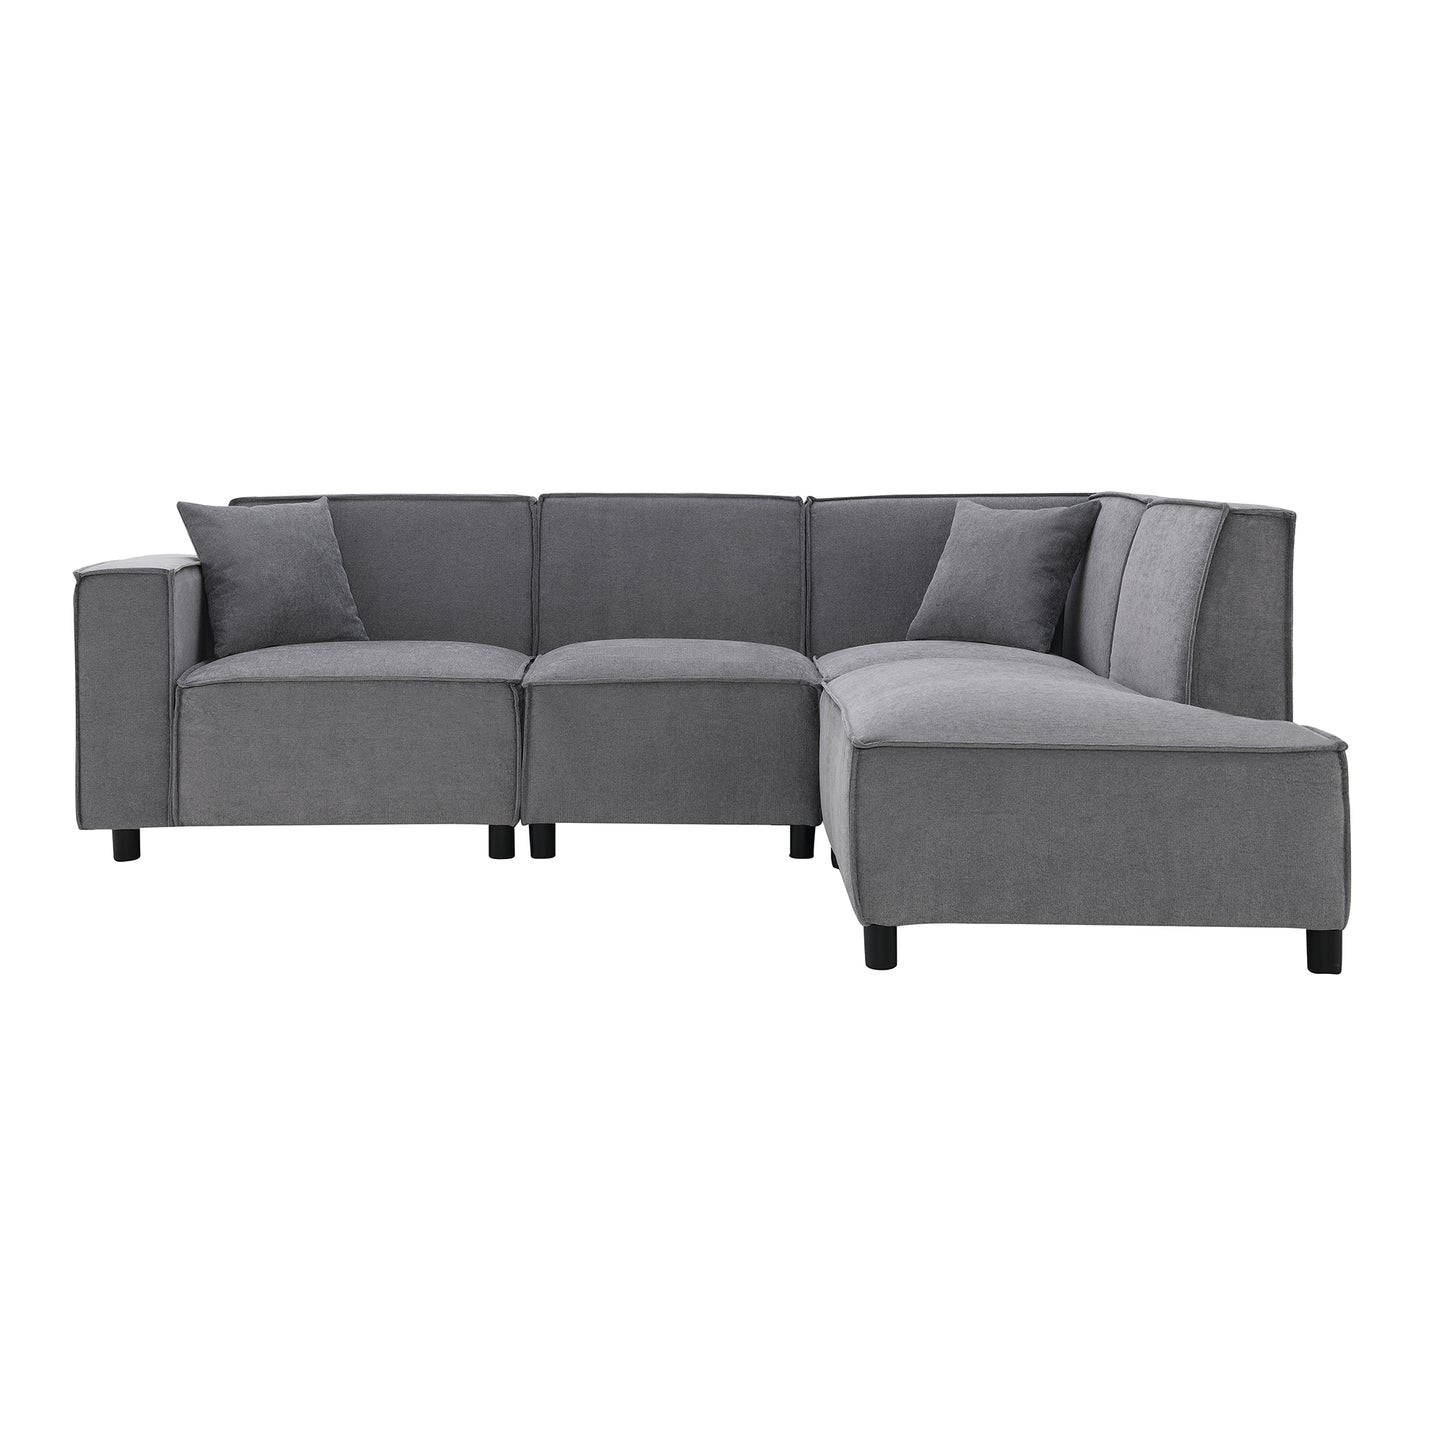 Modern Minimalist Style Sectional Sofa,L-shaped Couch Set with 2 Free pillows,5-seat Chenille Fabric Couch with Chaise Lounge for Living Room, Apartment, Office,2 Colors